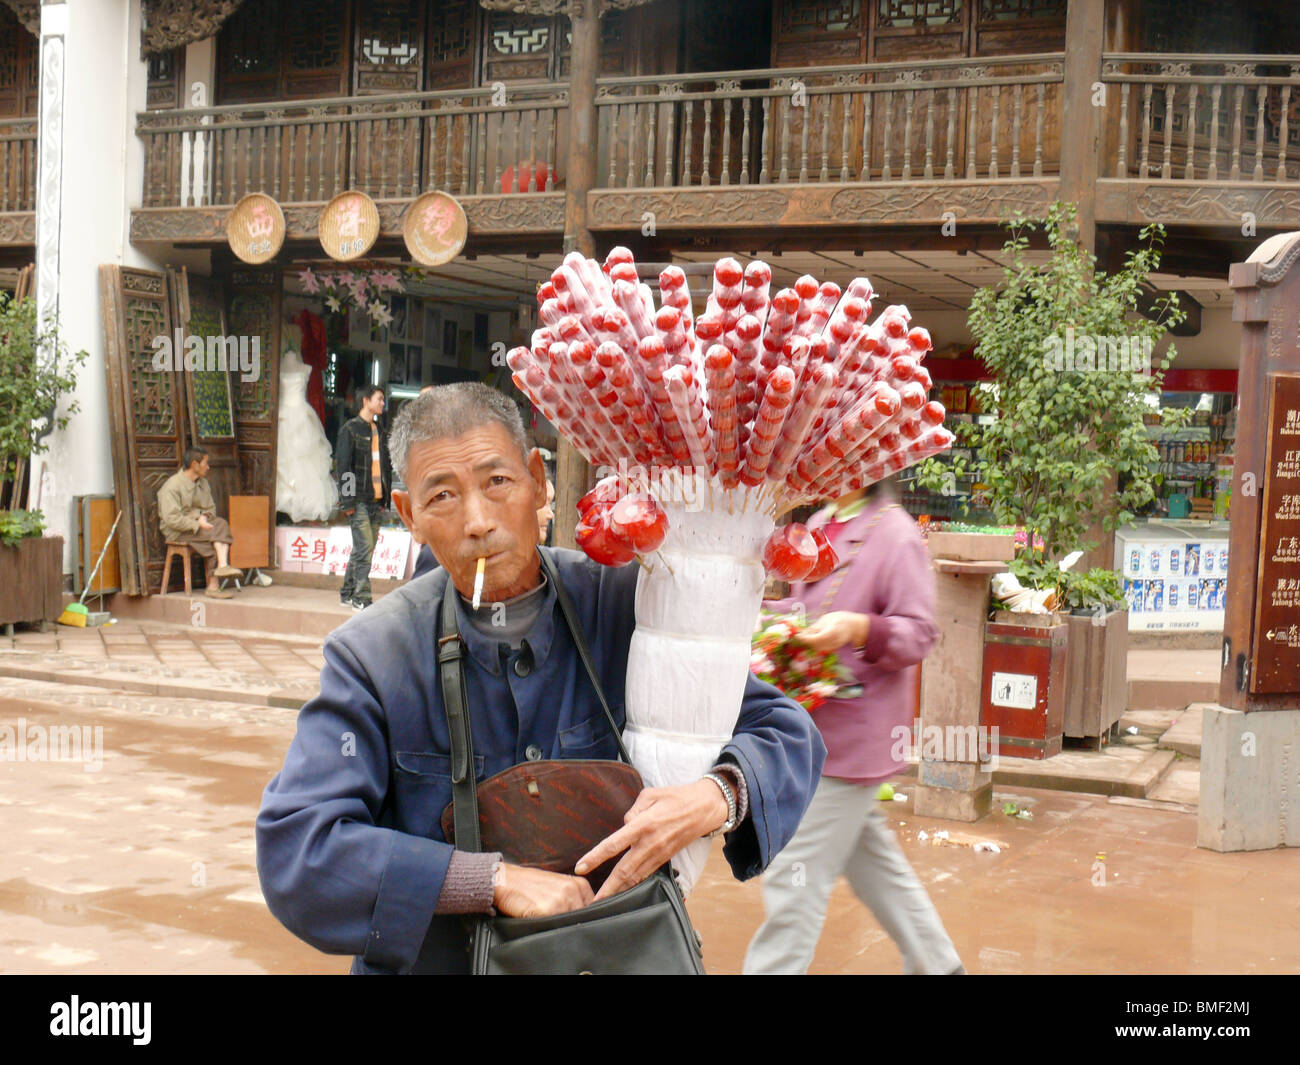 Elderly man selling traditional snack Tanghulu, Luodai Ancient Town, Chengdu, Sichuan Province, China Stock Photo